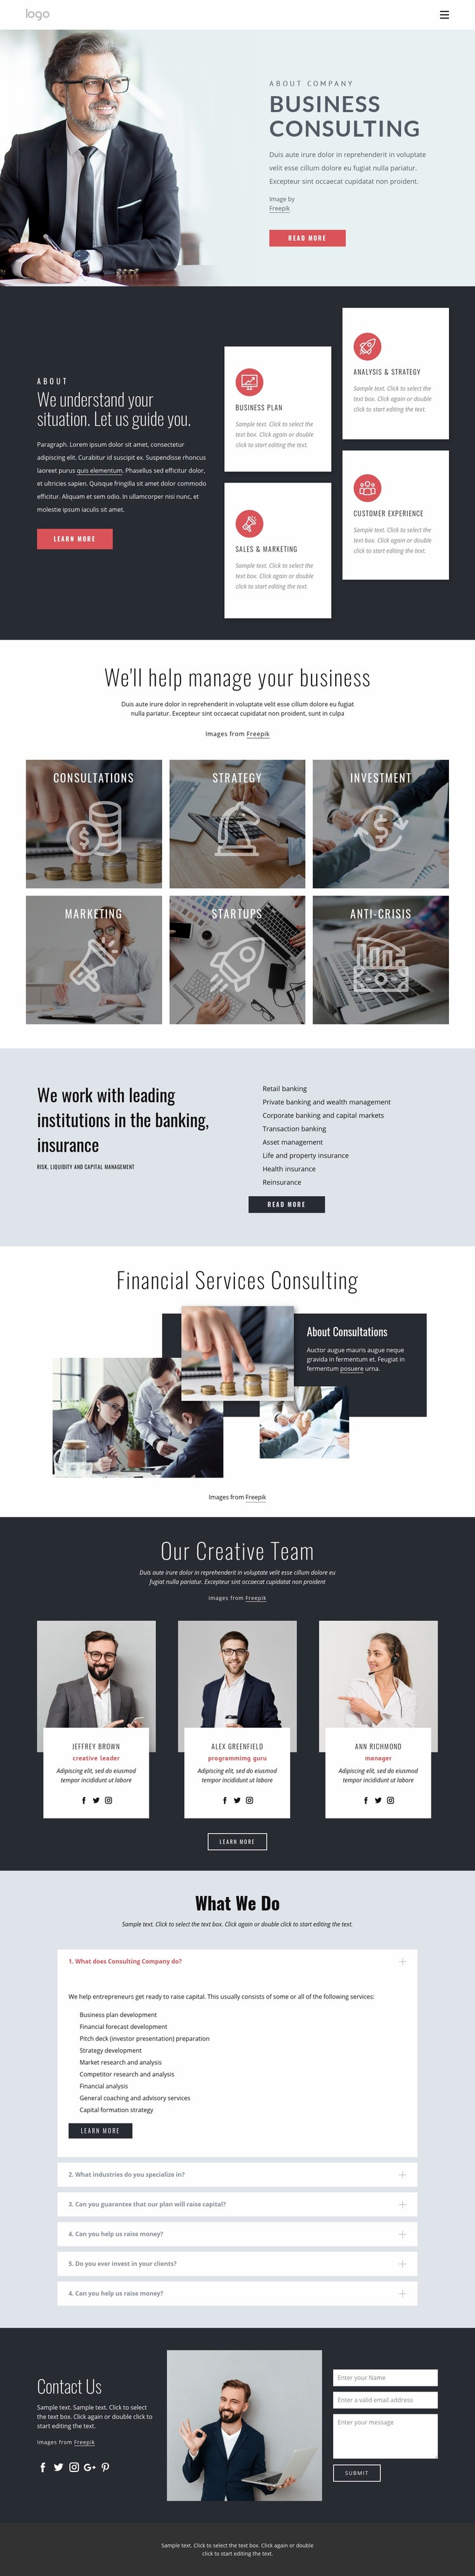 Successful financial strategy Homepage Design